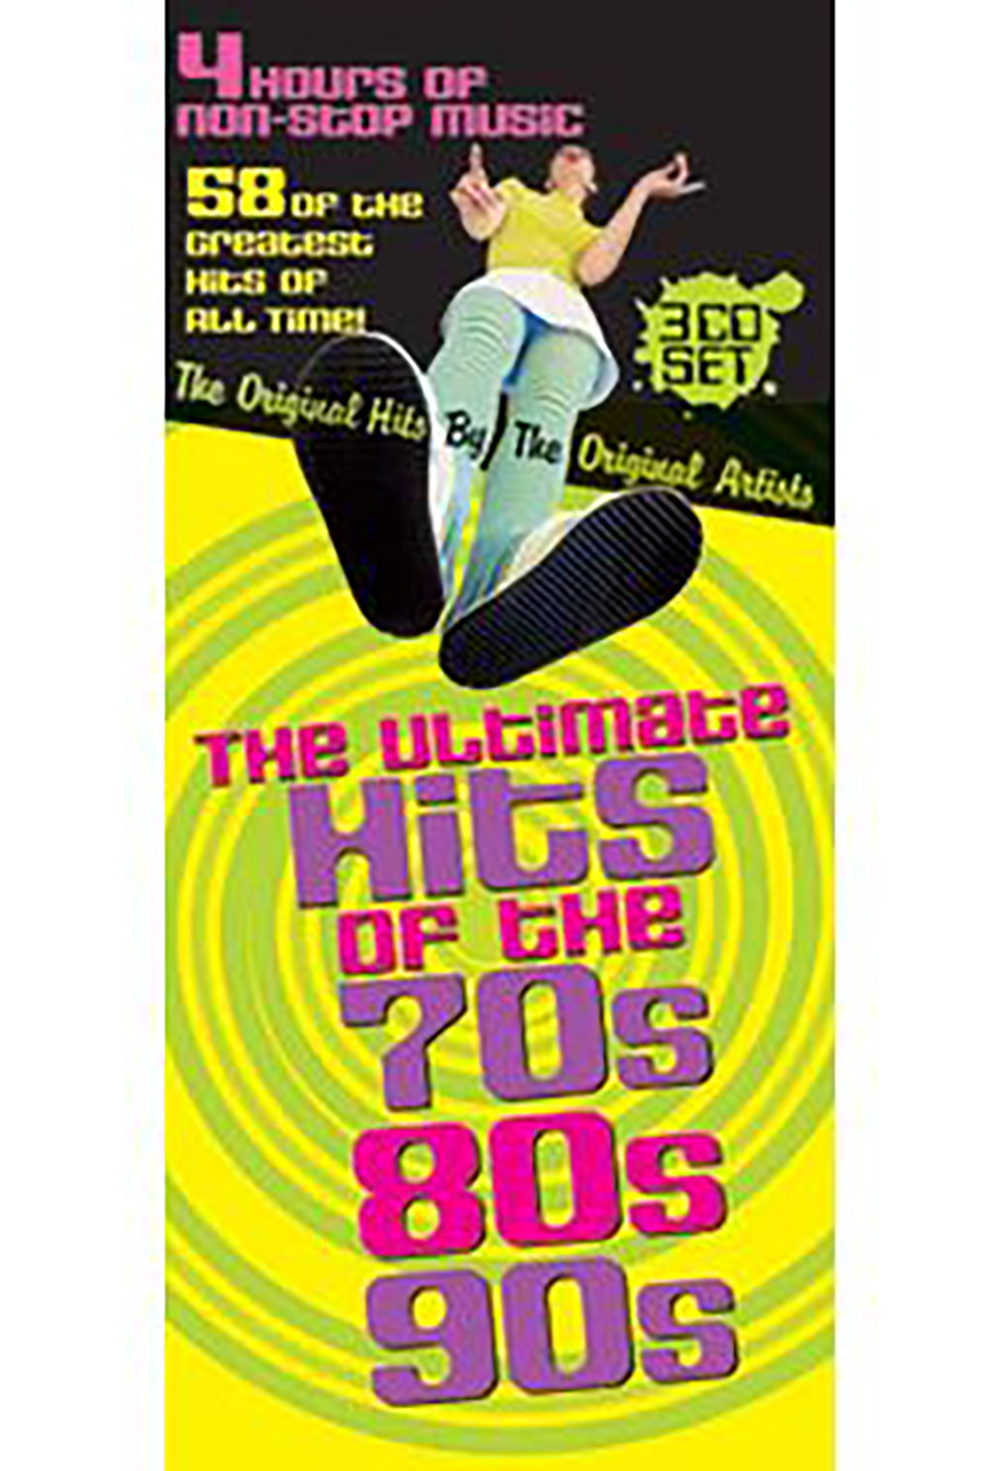 Ultimate Hits Of The 70s, 80s, 90s (3 CD)